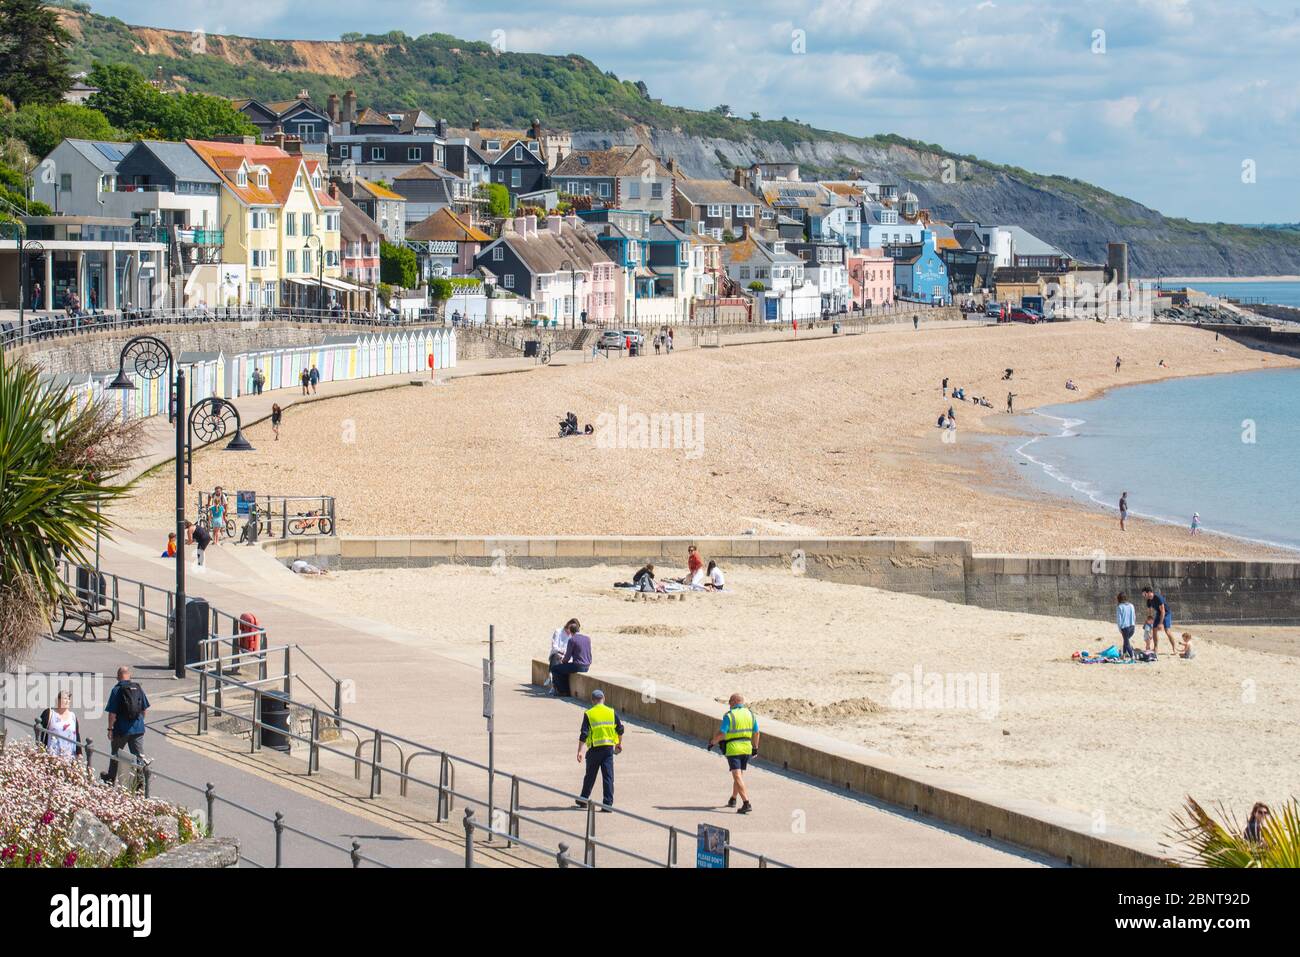 Lyme Regis, Dorset, UK. 16th May 2020. UK Weather: People start to return to the beach at Lyme Regis on the first sunny Saturday since the Government coronavirus restrictions were eased. The beach was busier than it has been since the start of the lockdown. Credit: Celia McMahon/Alamy Live News. Stock Photo